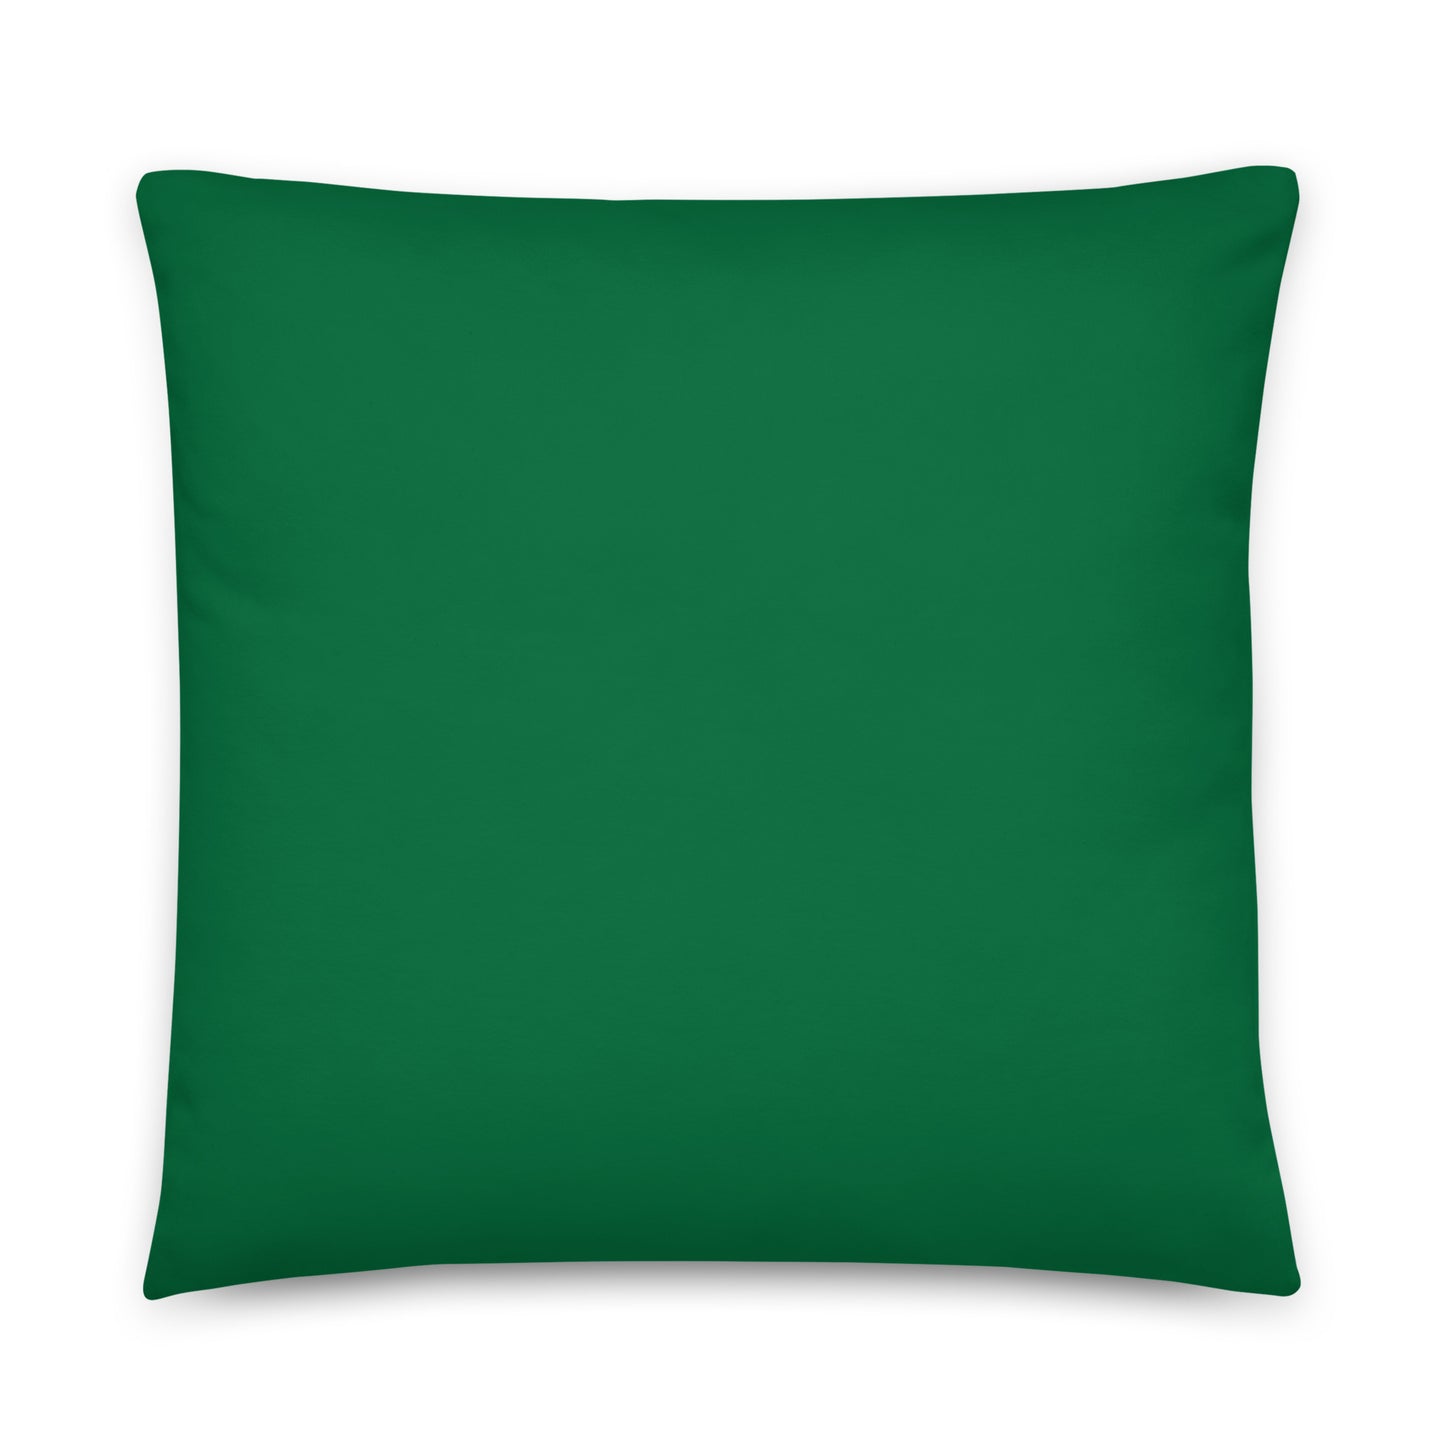 Basic Green - Sustainably Made Pillows